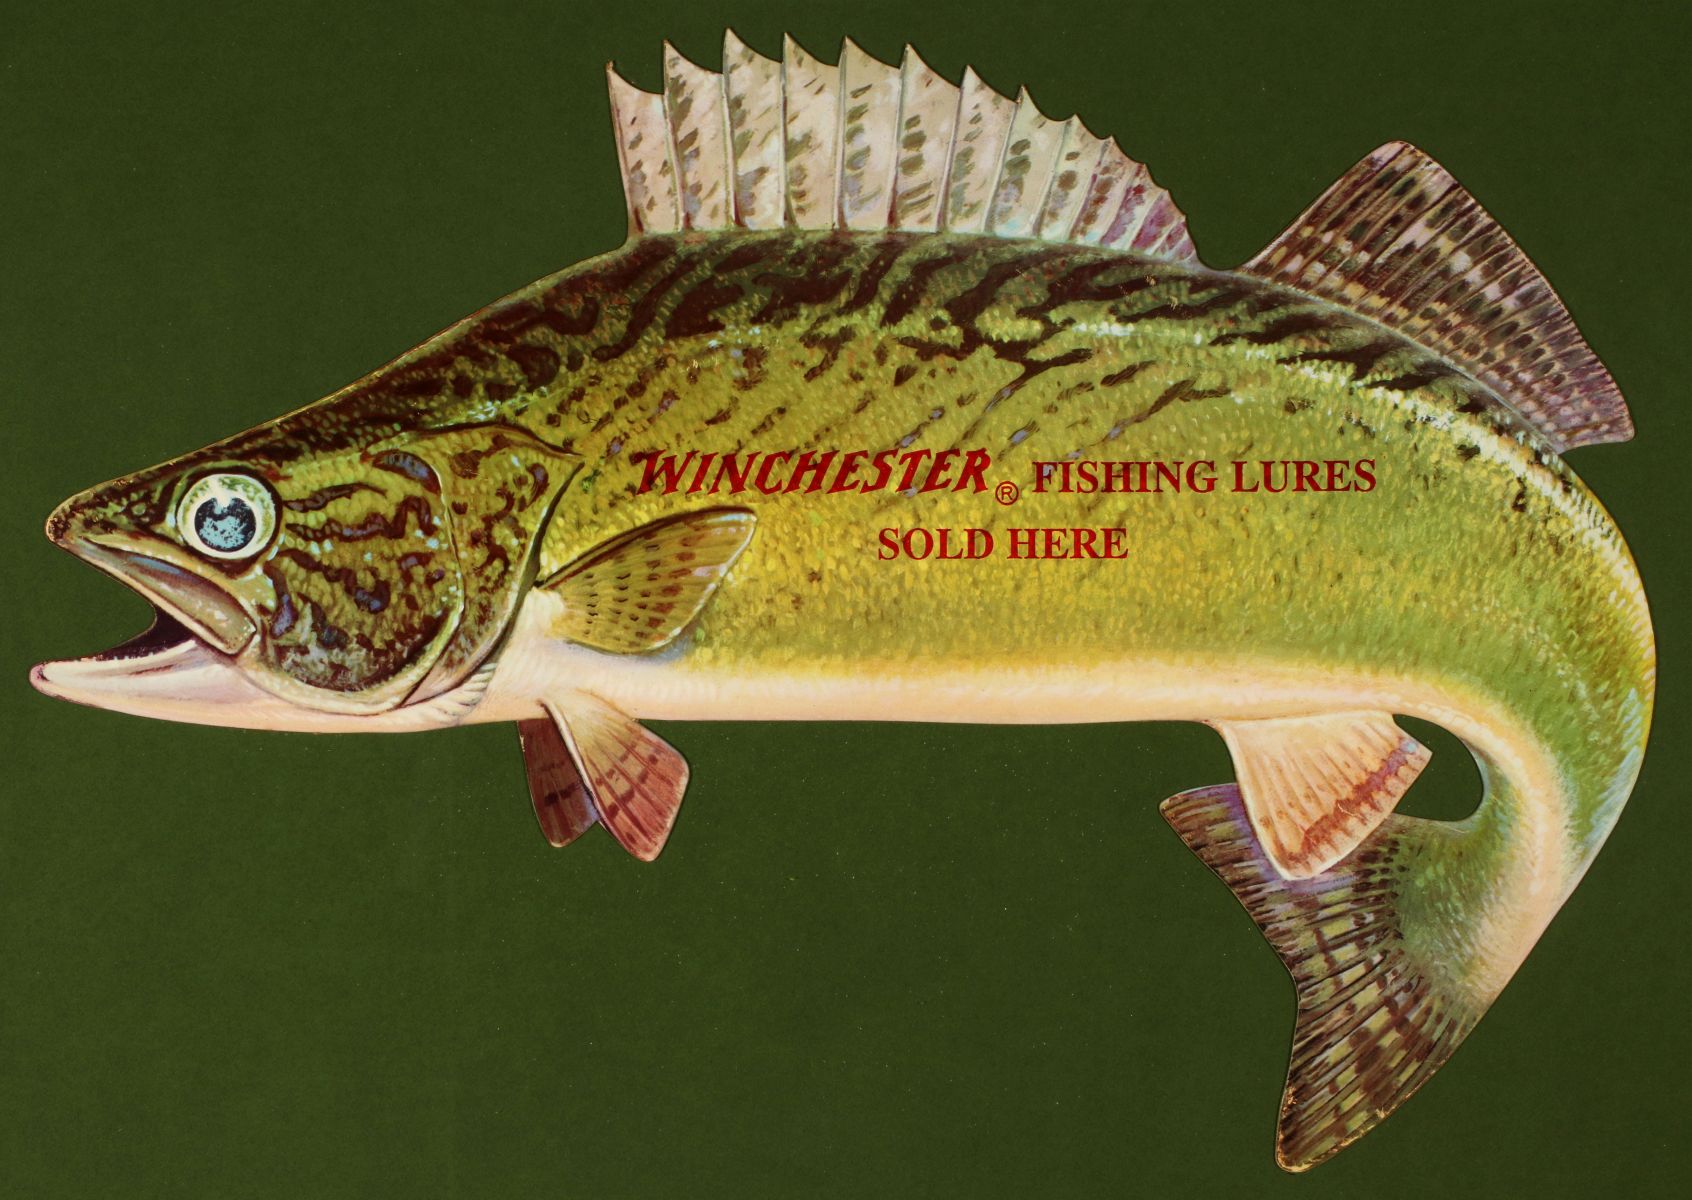 21: A NEW OLD STOCK WINCHESTER FISHING LURES DIE-CUT SIGN